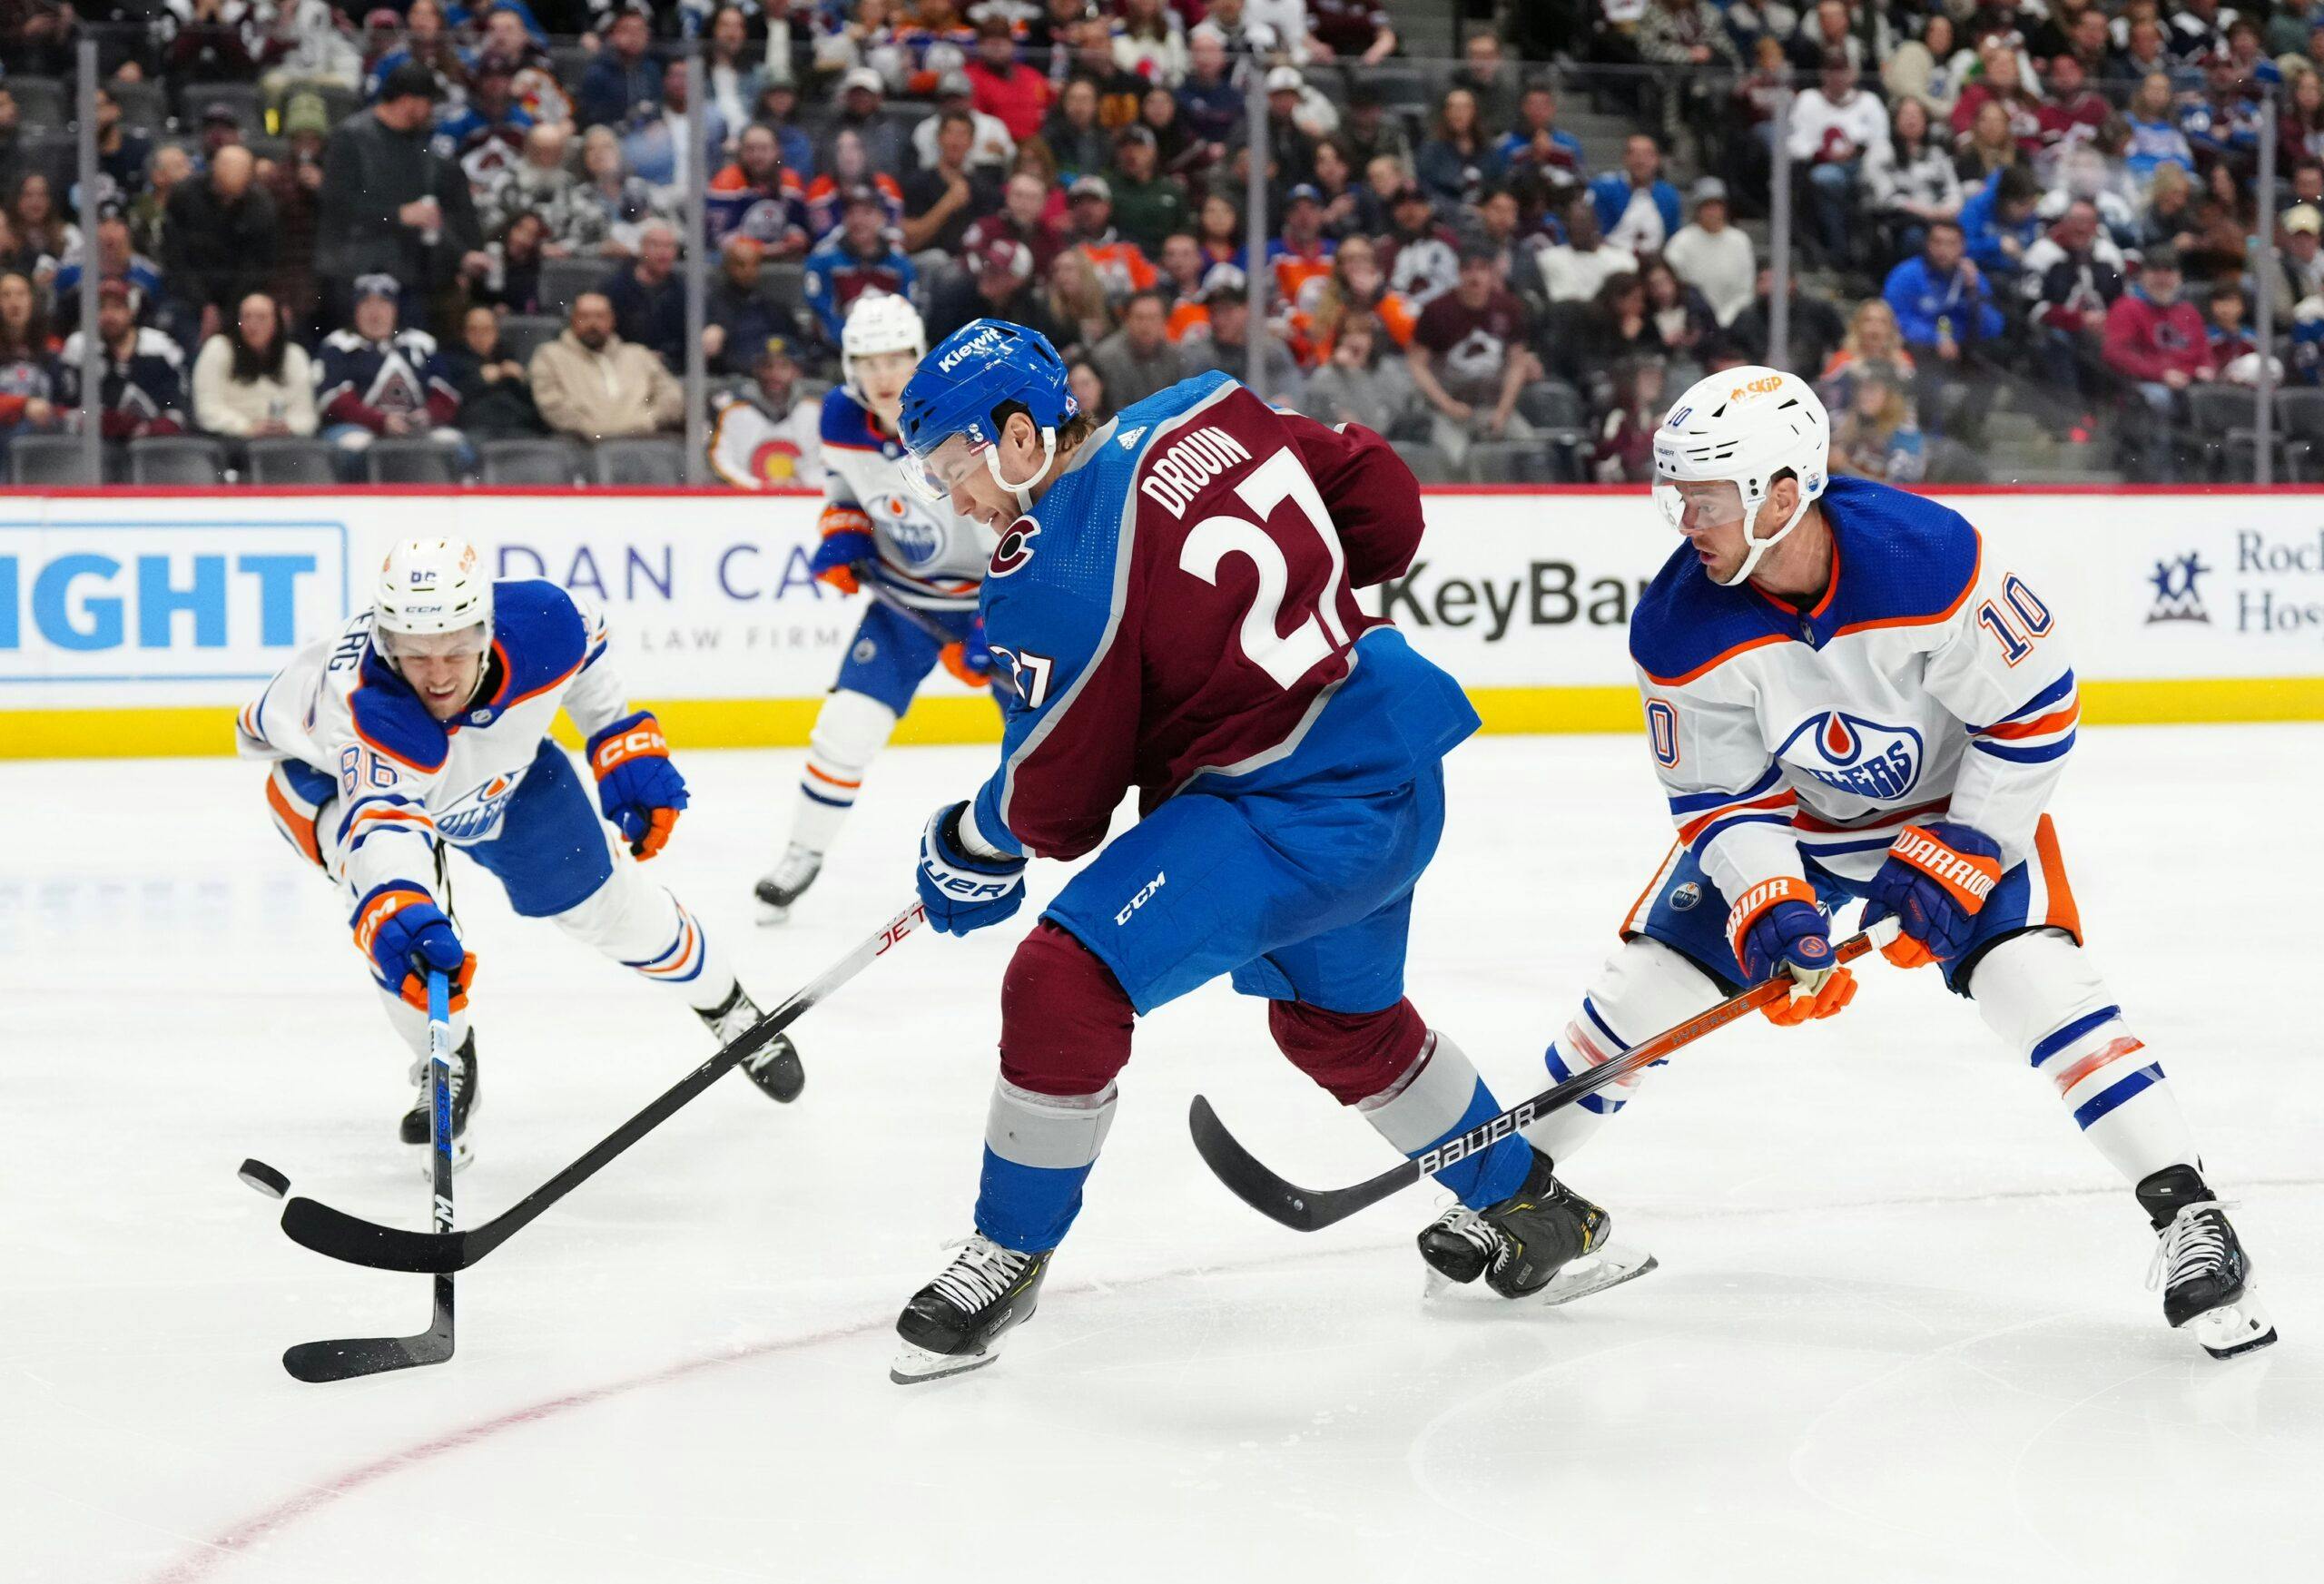 Colorado Avalanche’s Jonathan Drouin to miss first round series vs. Jets with lower-body injury